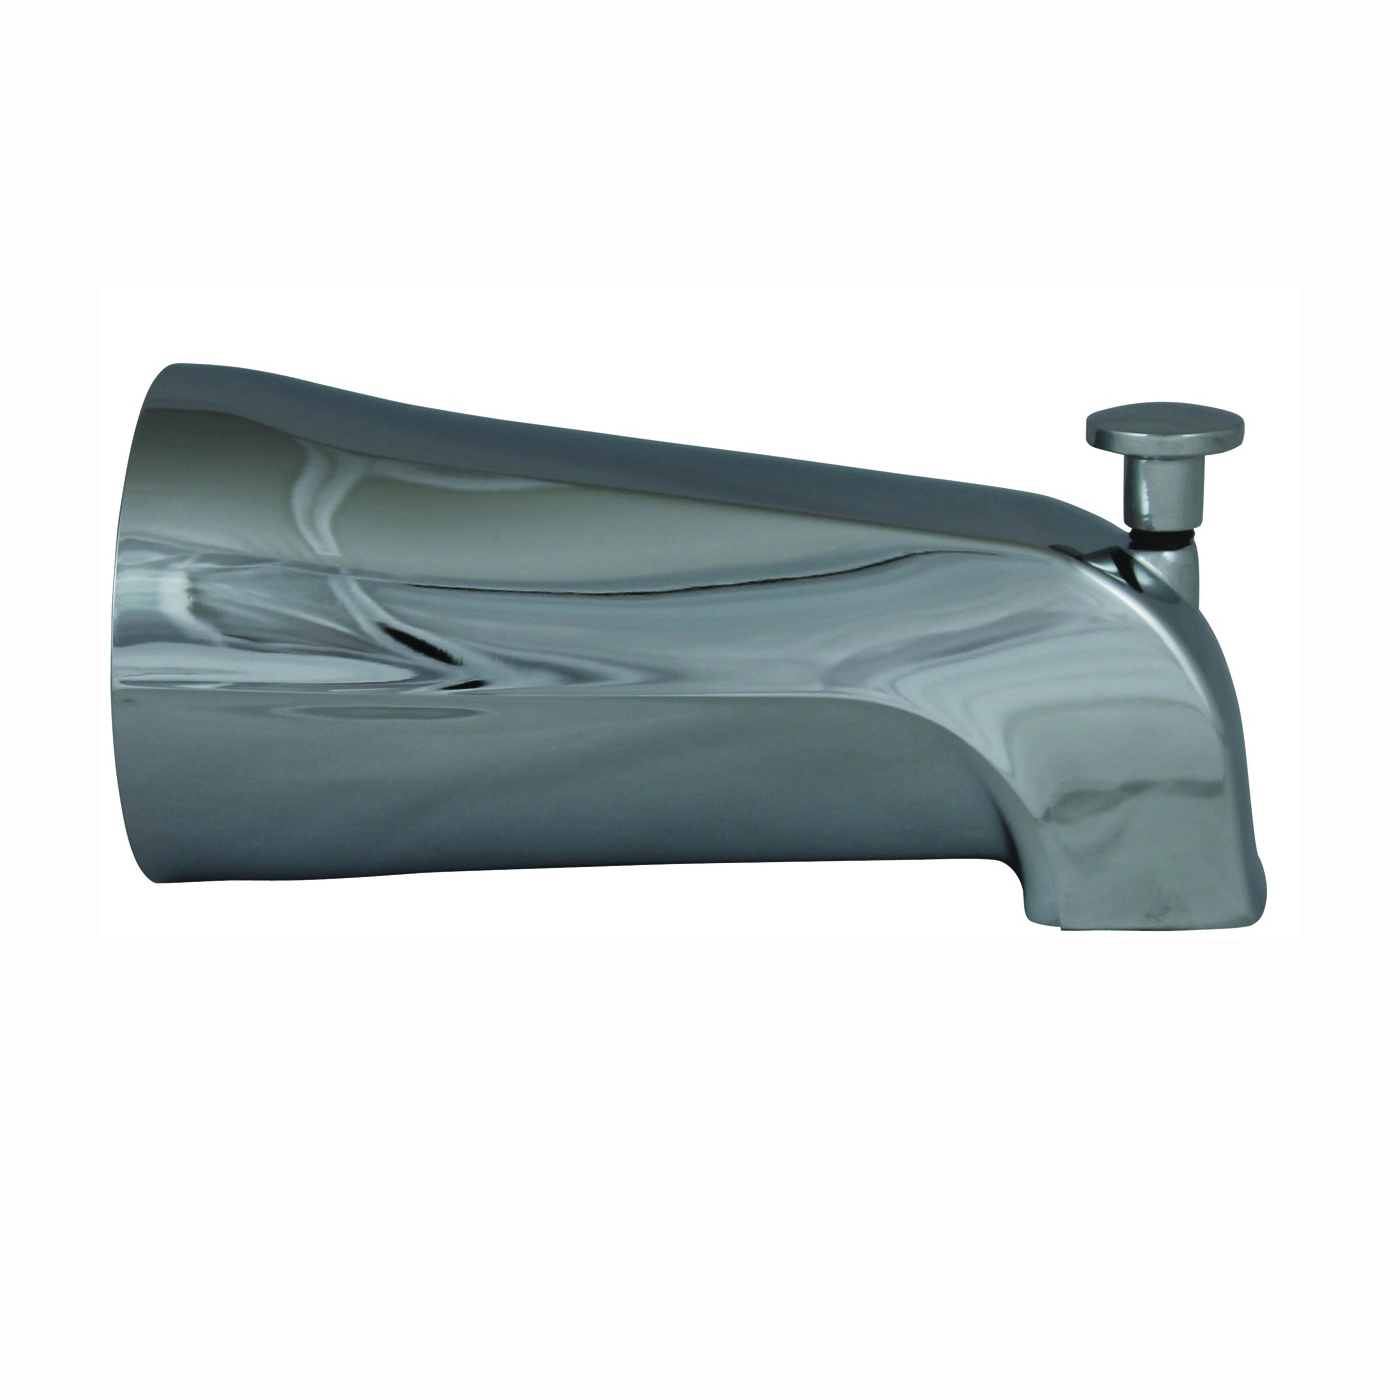 PP22536 Bathtub Spout, 3/4 in Connection, IPS, Chrome Plated, For: 1/2 in or 3/4 in Pipe